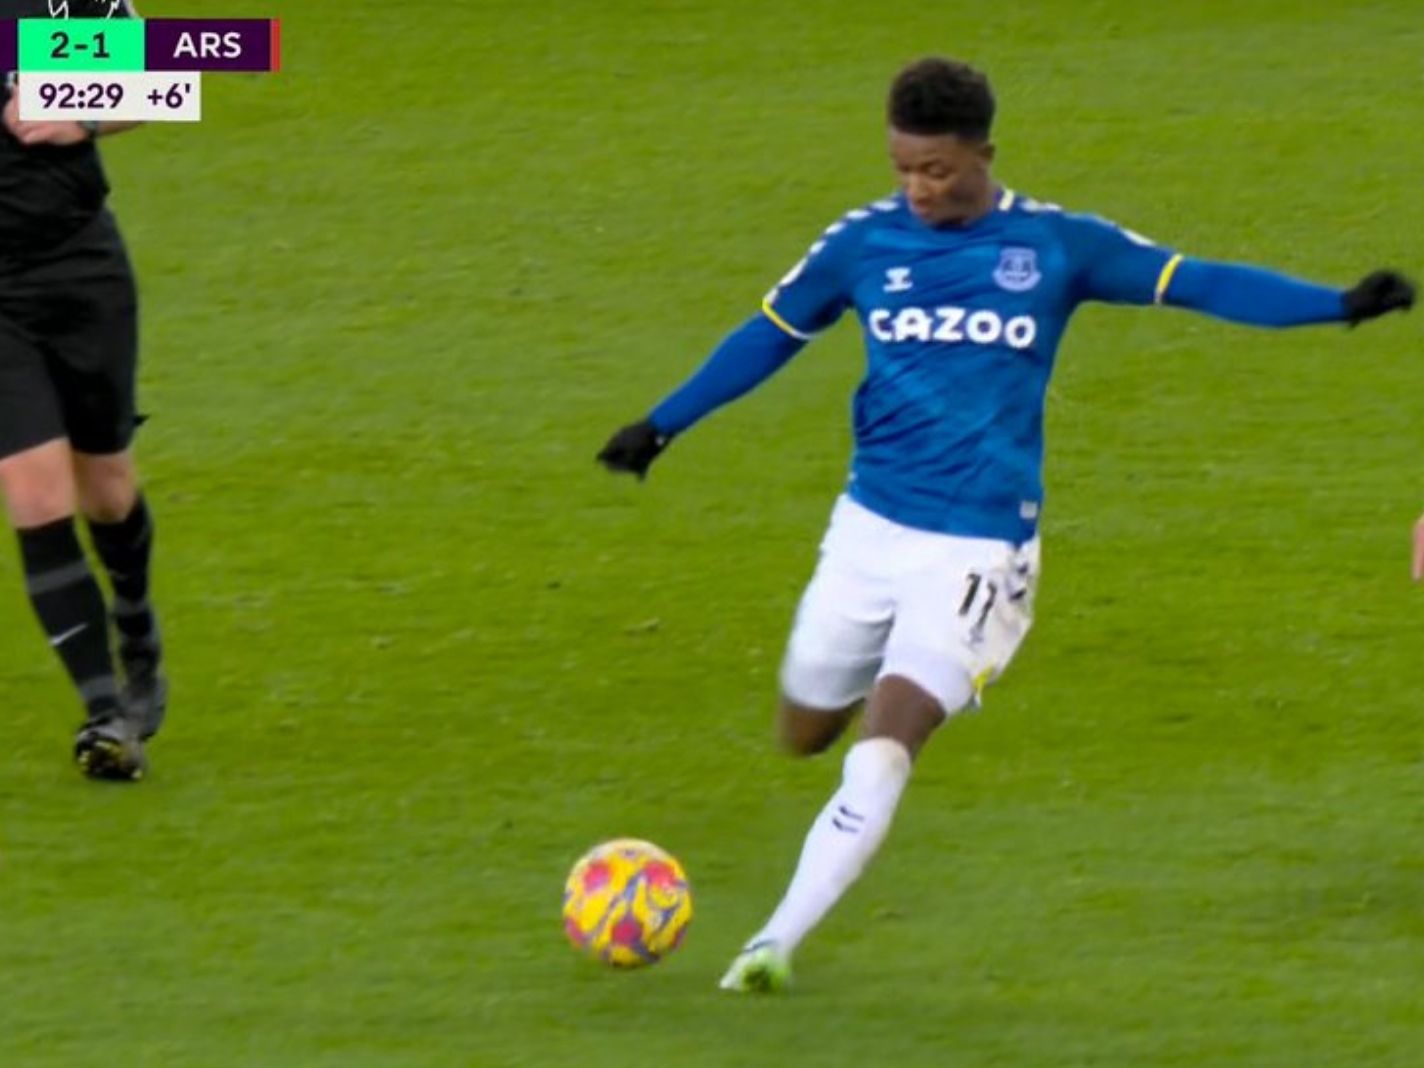 Martin Tyler takes fans by surprise with vintage reaction to Demarai Gray’s goal v Arsenal